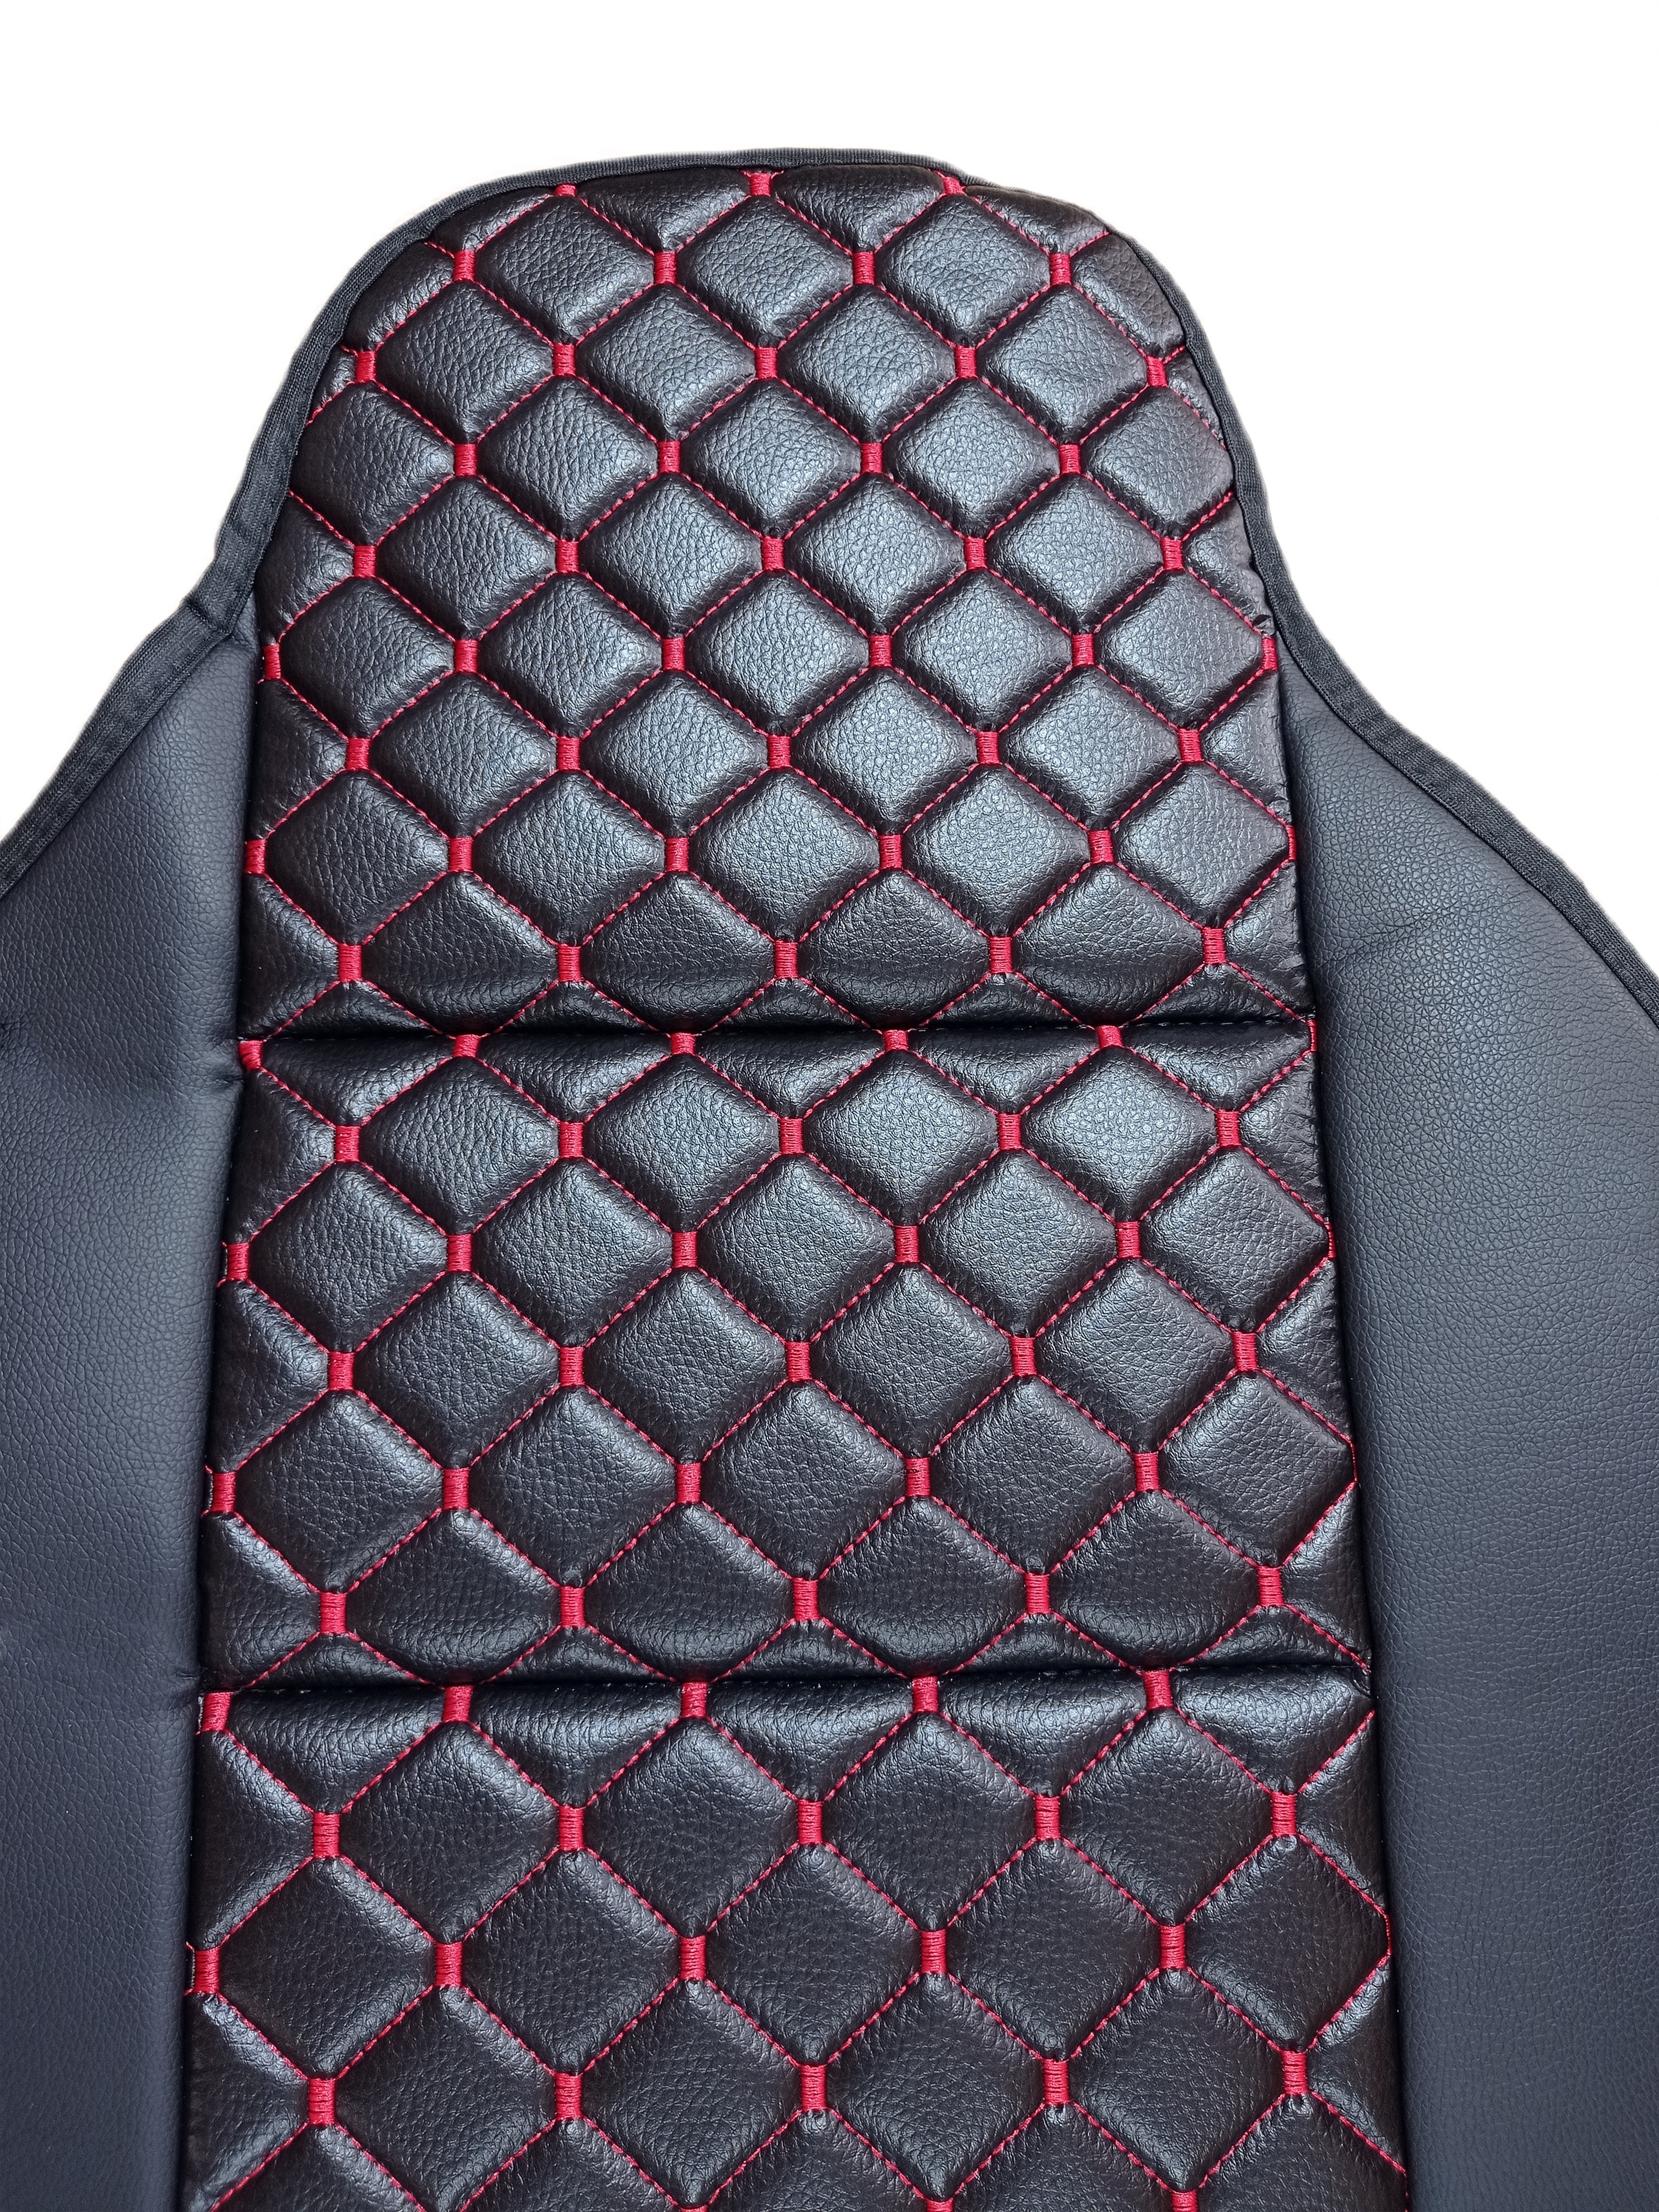 Seat covers Protector for Cars Universal Black Red Eco Leather 